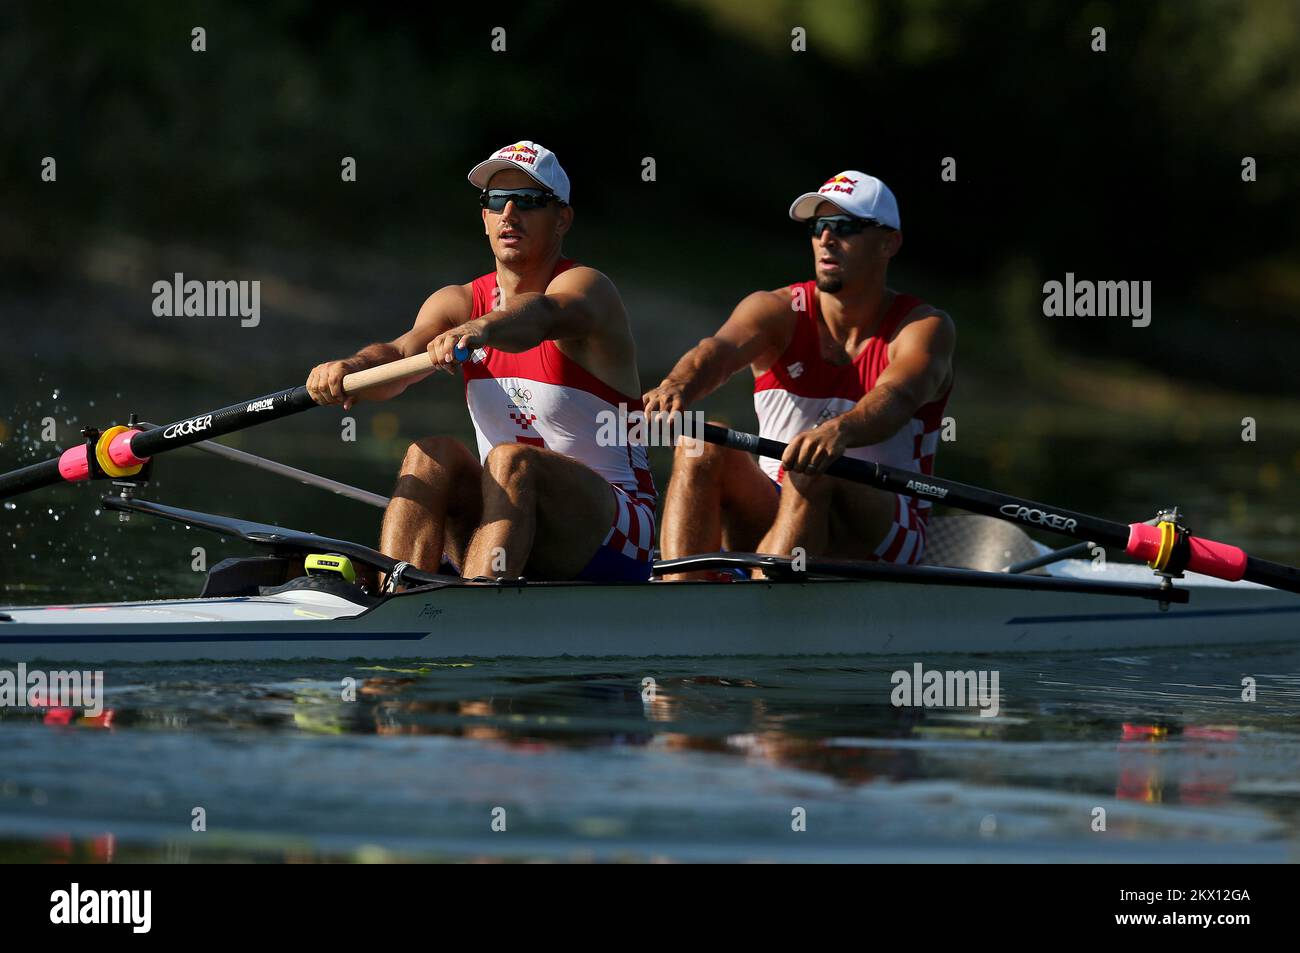 Croatian Olympic rowing champions, Martin and Valent Sinkovic train coxless pairs on lake Jarun in Zagreb, Croatia on June 22, 2017. After dominating the double skulls discipline and remaining unbeaten for three years, the brothers change disciplines they now race in the coxless pairs. Photo: Igor Kralj/PIXSELL Stock Photo